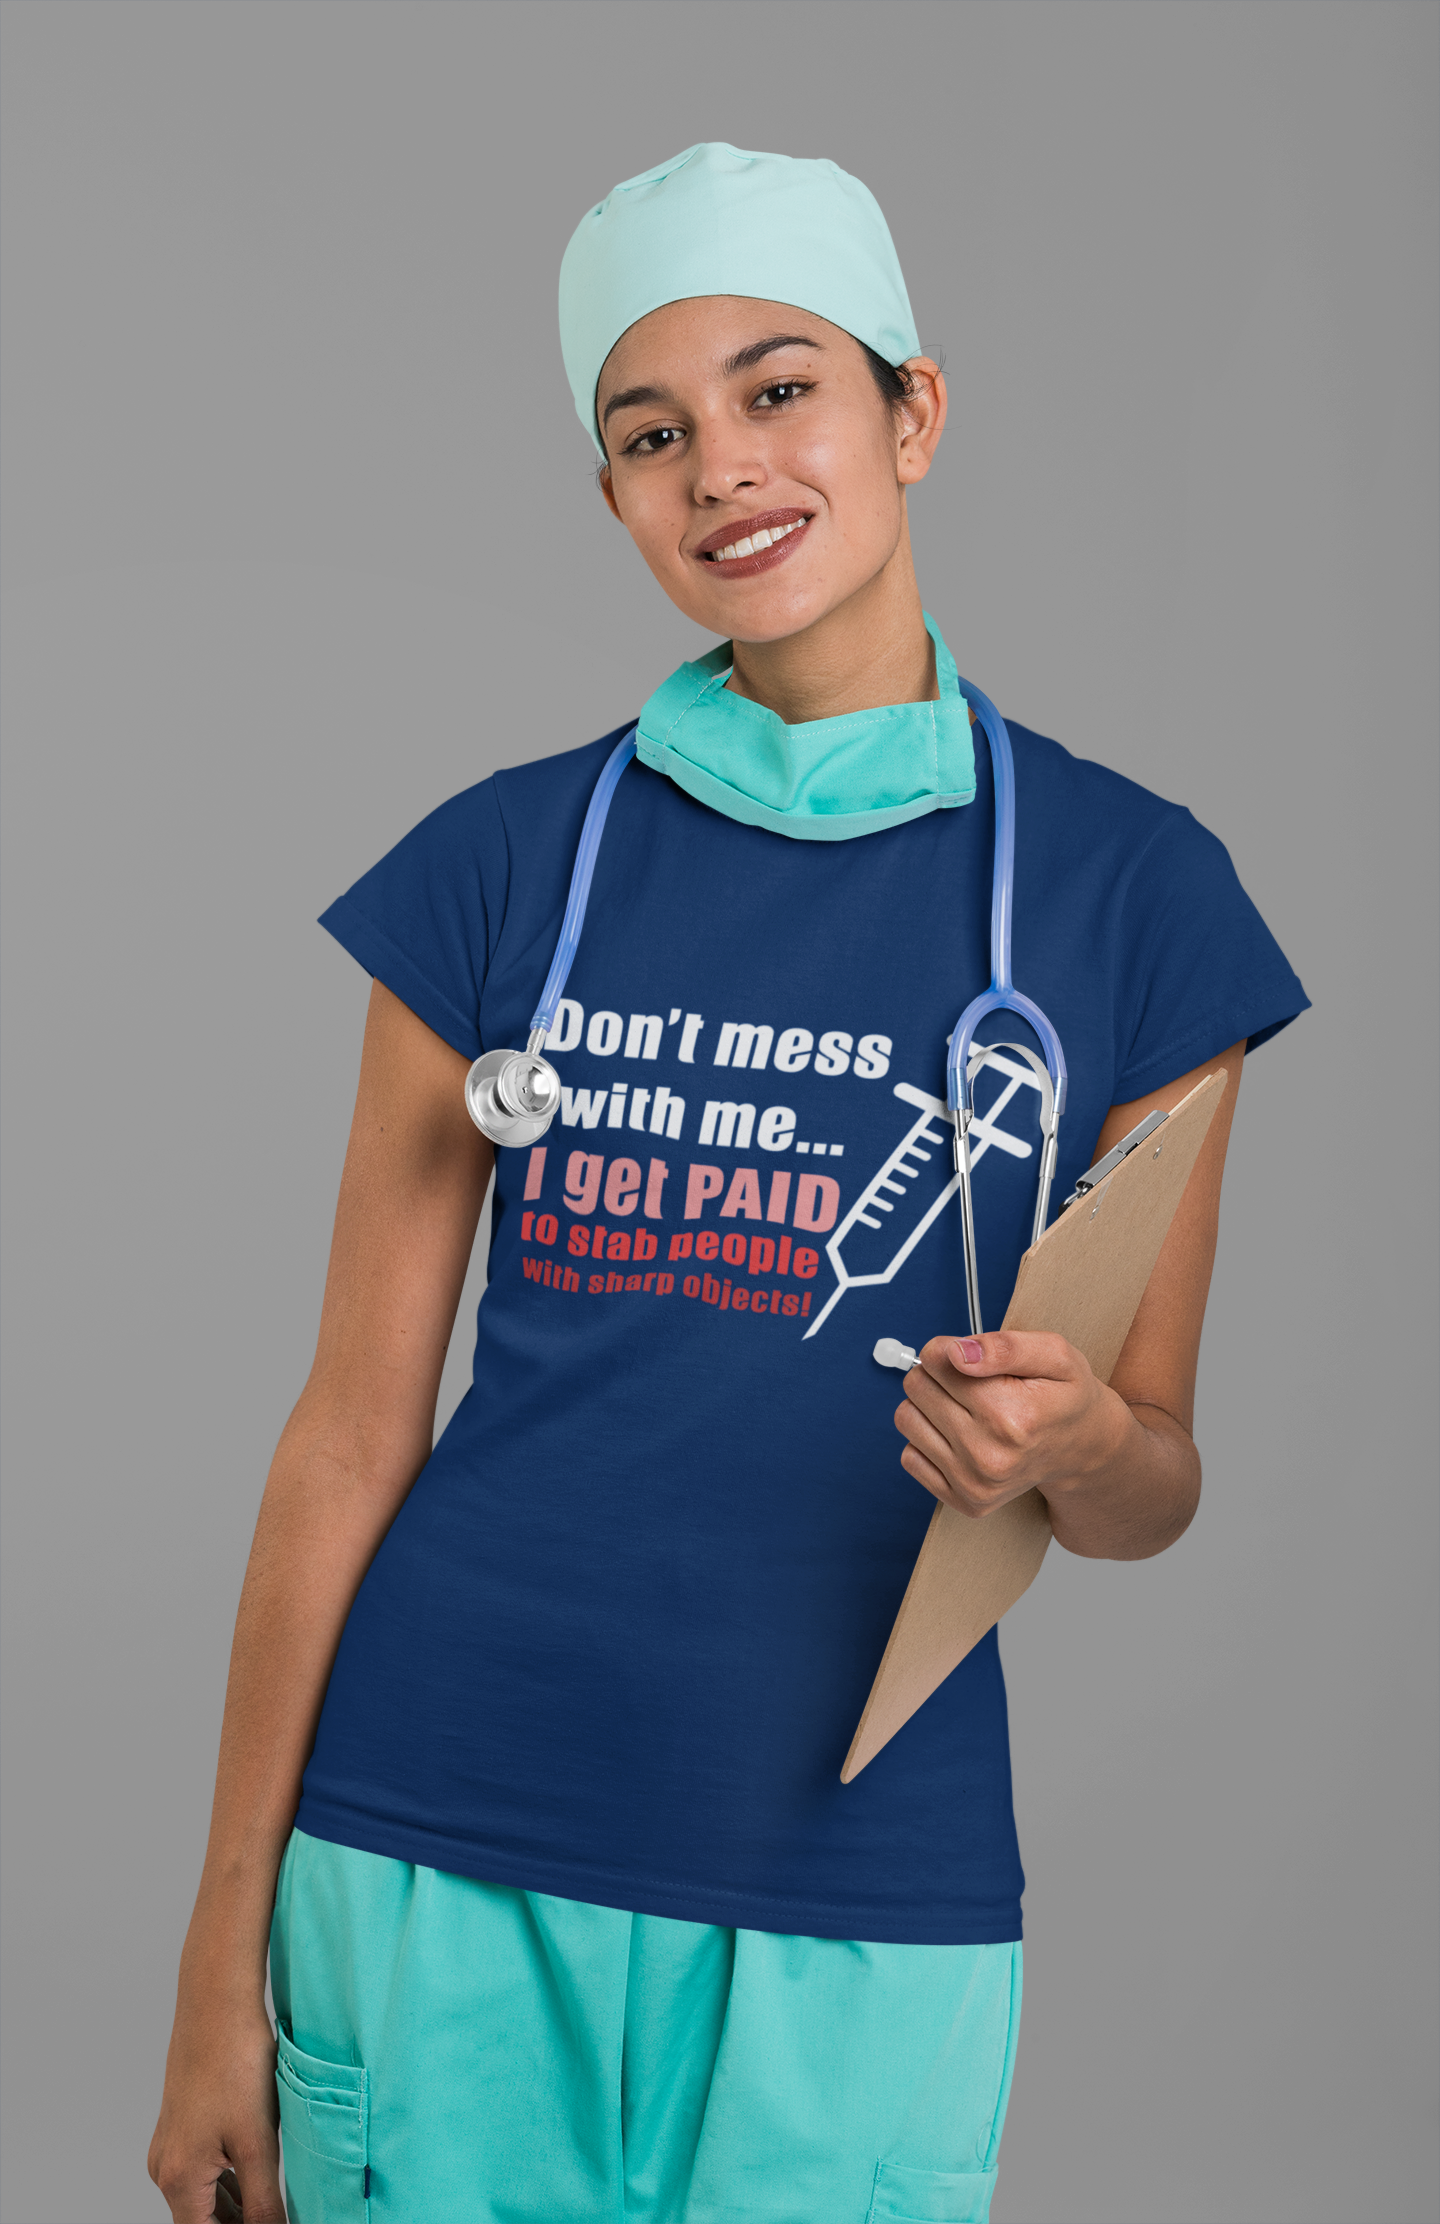 t-shirt-mockup-featuring-a-nurse-with-a-stethoscope-around-her-neck-27481.png